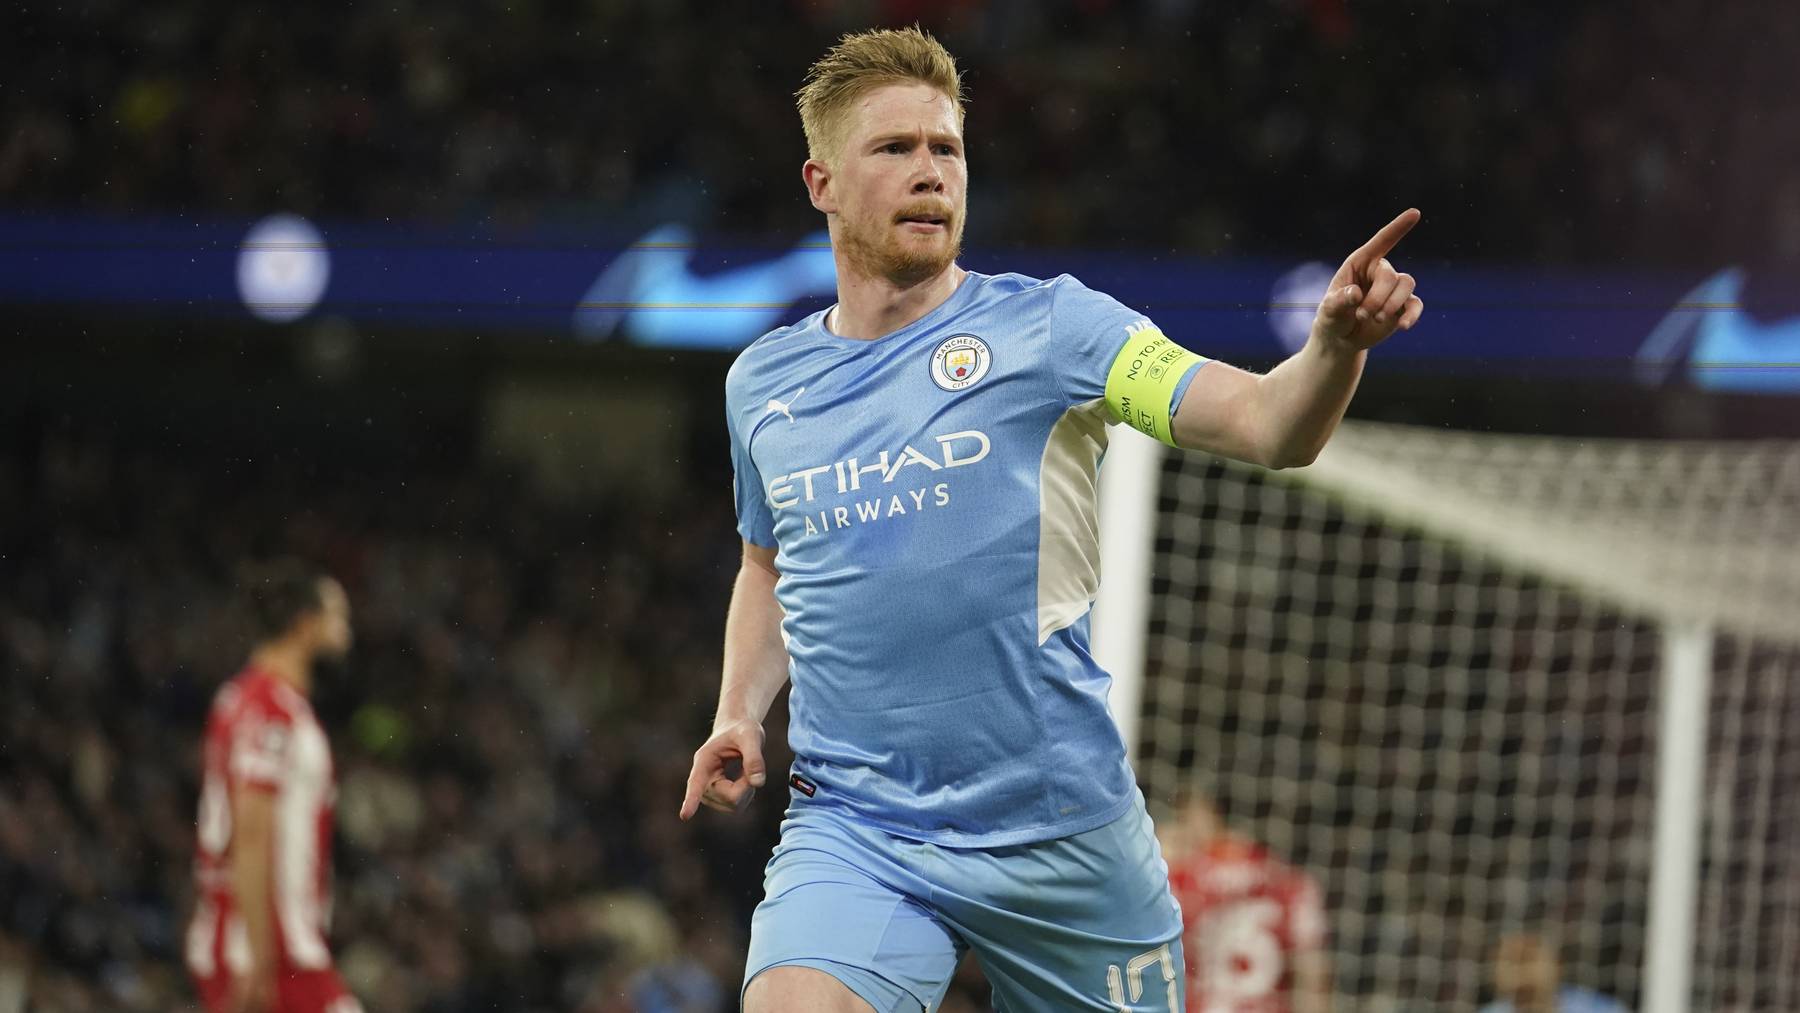 Manchester City's Kevin De Bruyne celebrates after scoring his side's opening goal during the Champions League, first leg, quarterfinal soccer match between Manchester City and Atletico Madrid at the Etihad Stadium, in Manchester, Tuesday, April 5, 2022.